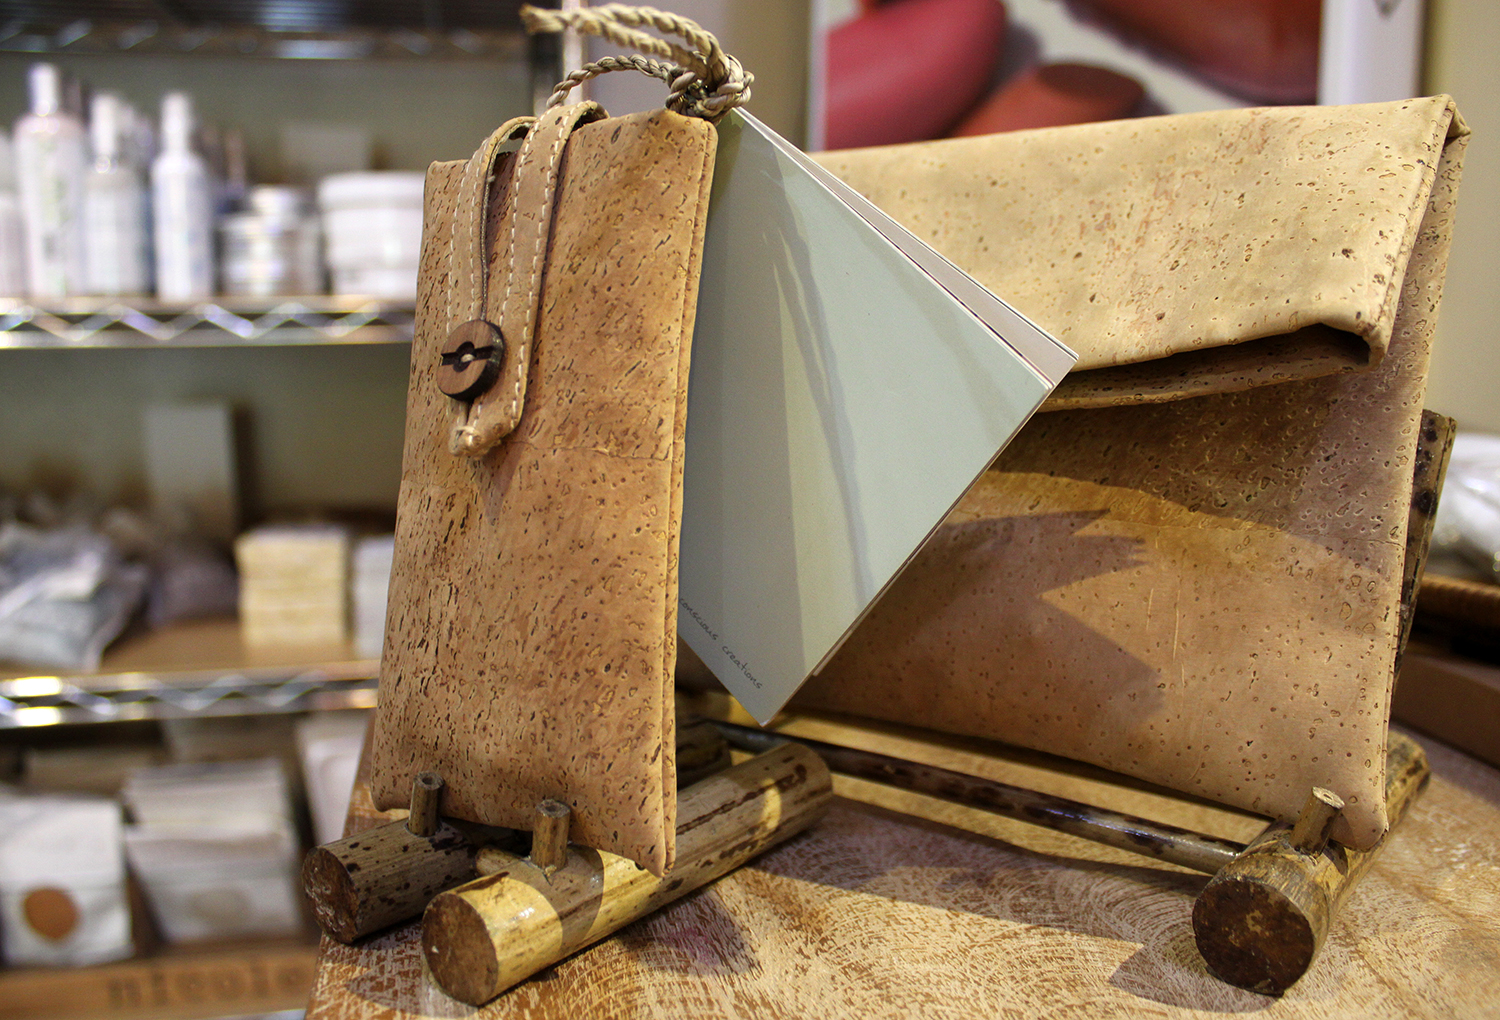 Sustainable vegan bags by ONO Creations at Earth Café. Image by Samantha Chalker / Lonely Planet